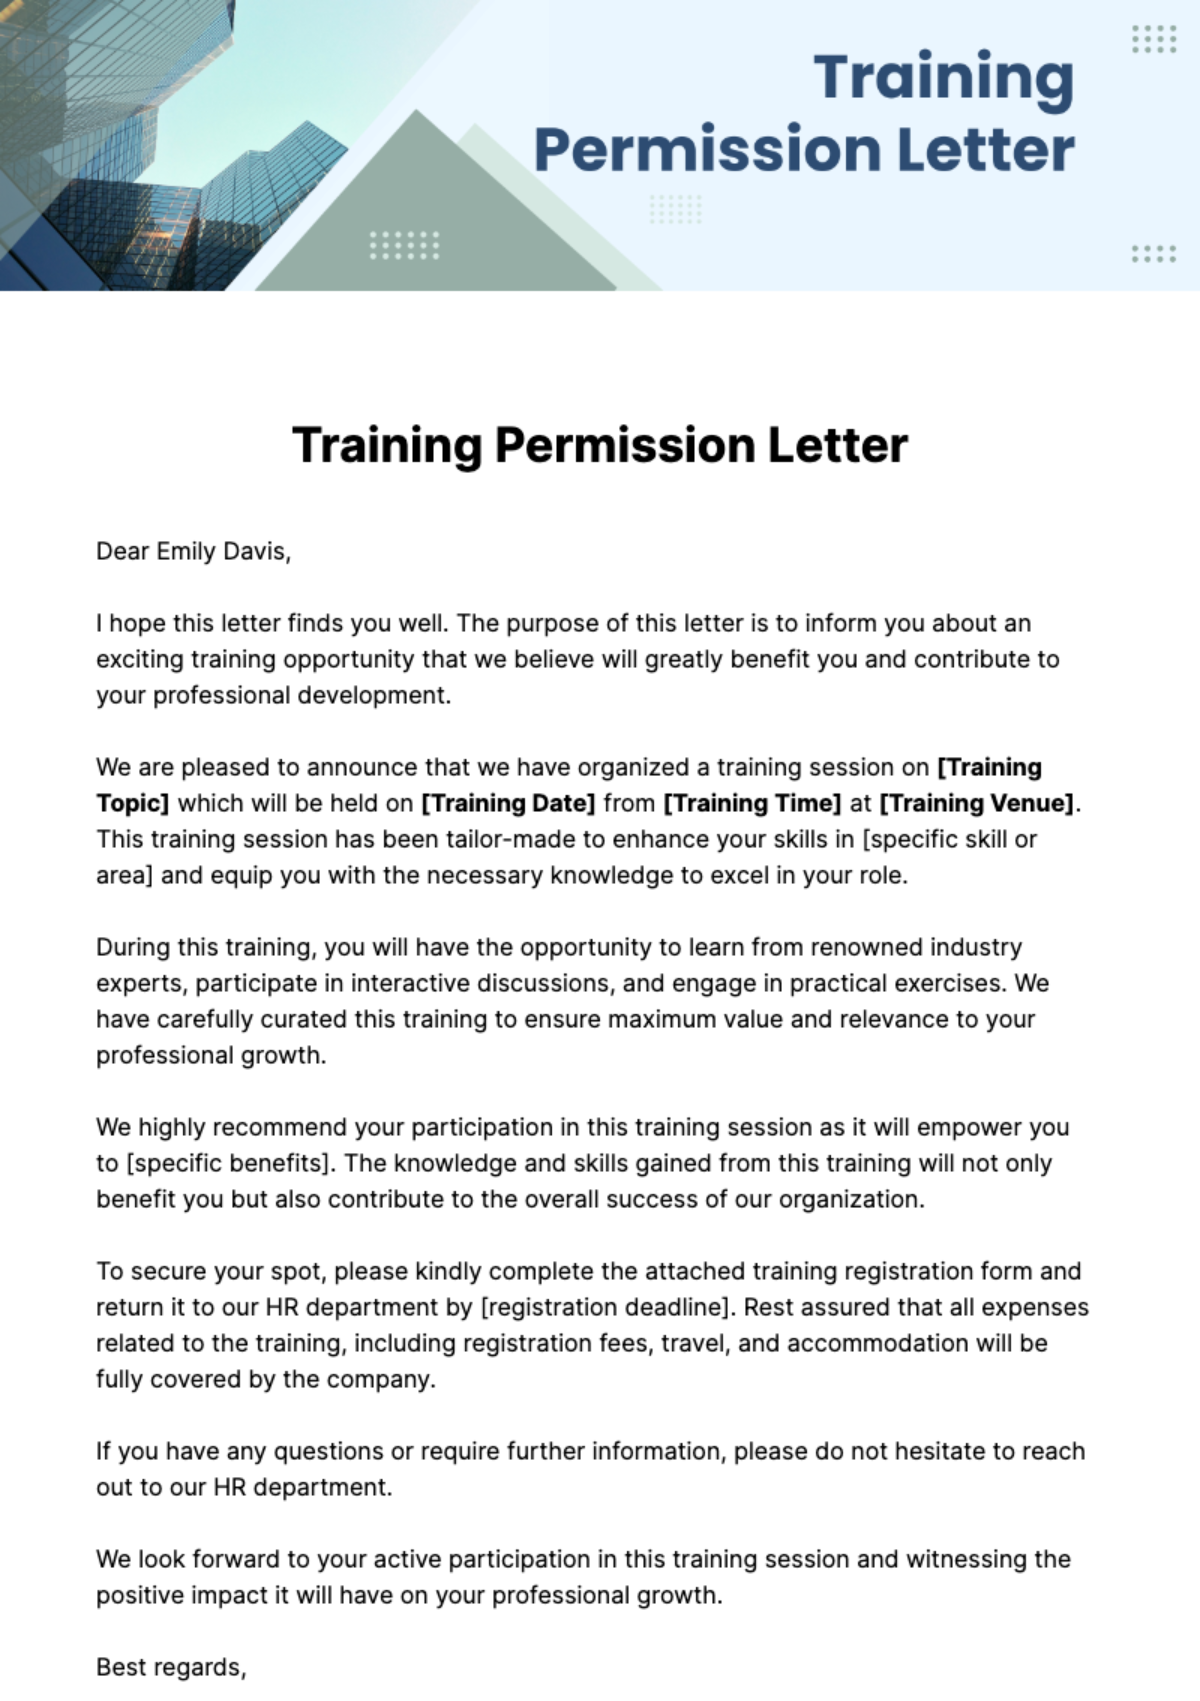 Free Training Permission Letter Template